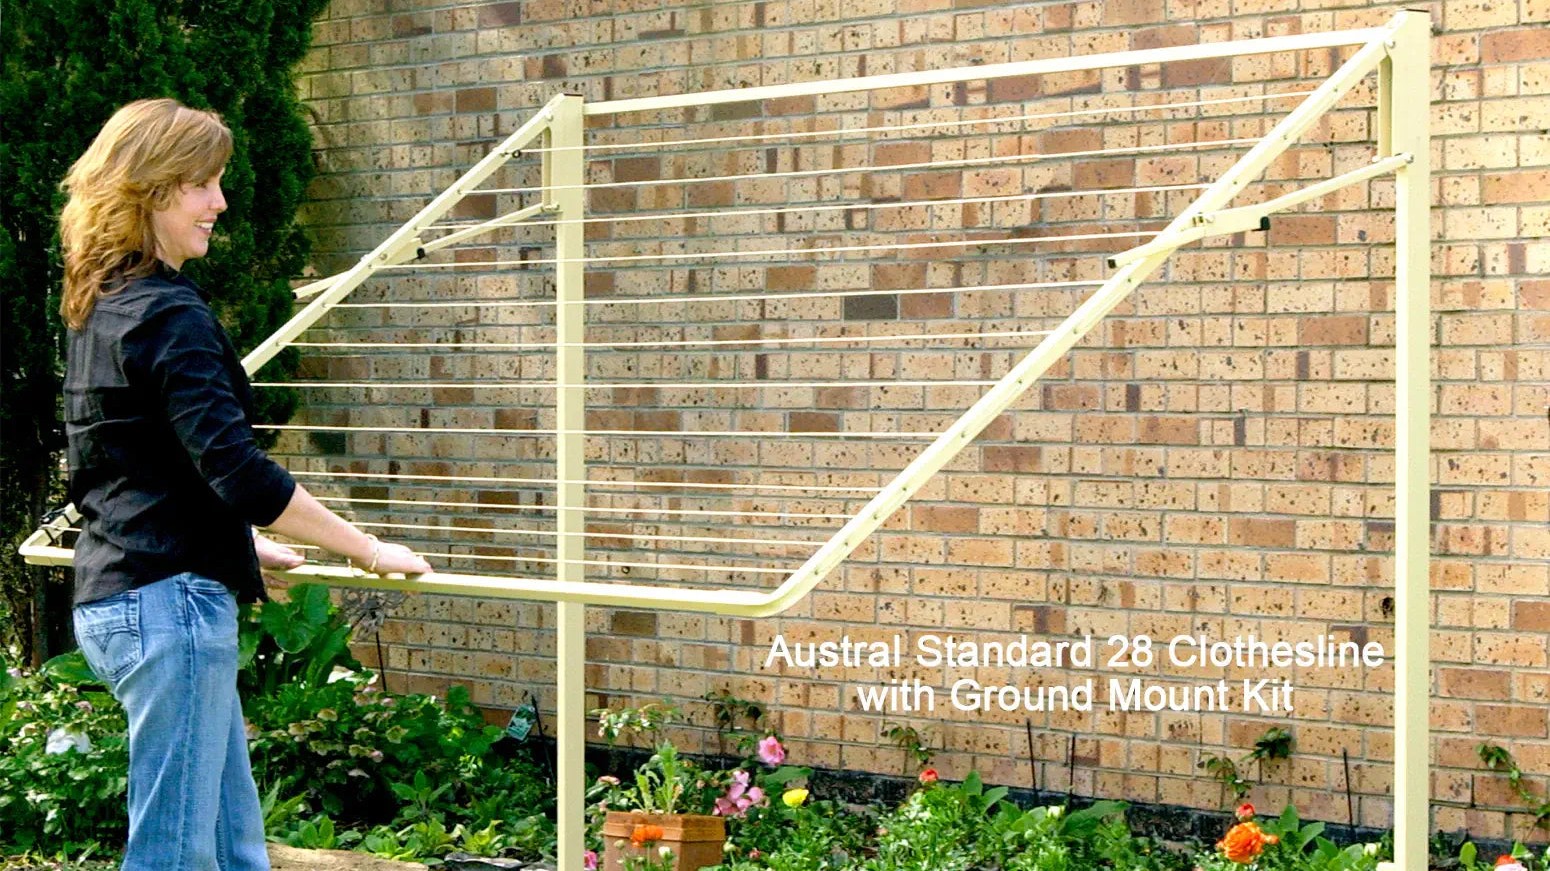 Comprehensive Austral Standard 28 Clothesline Review – Your Reliable Drying Solution Evaluated